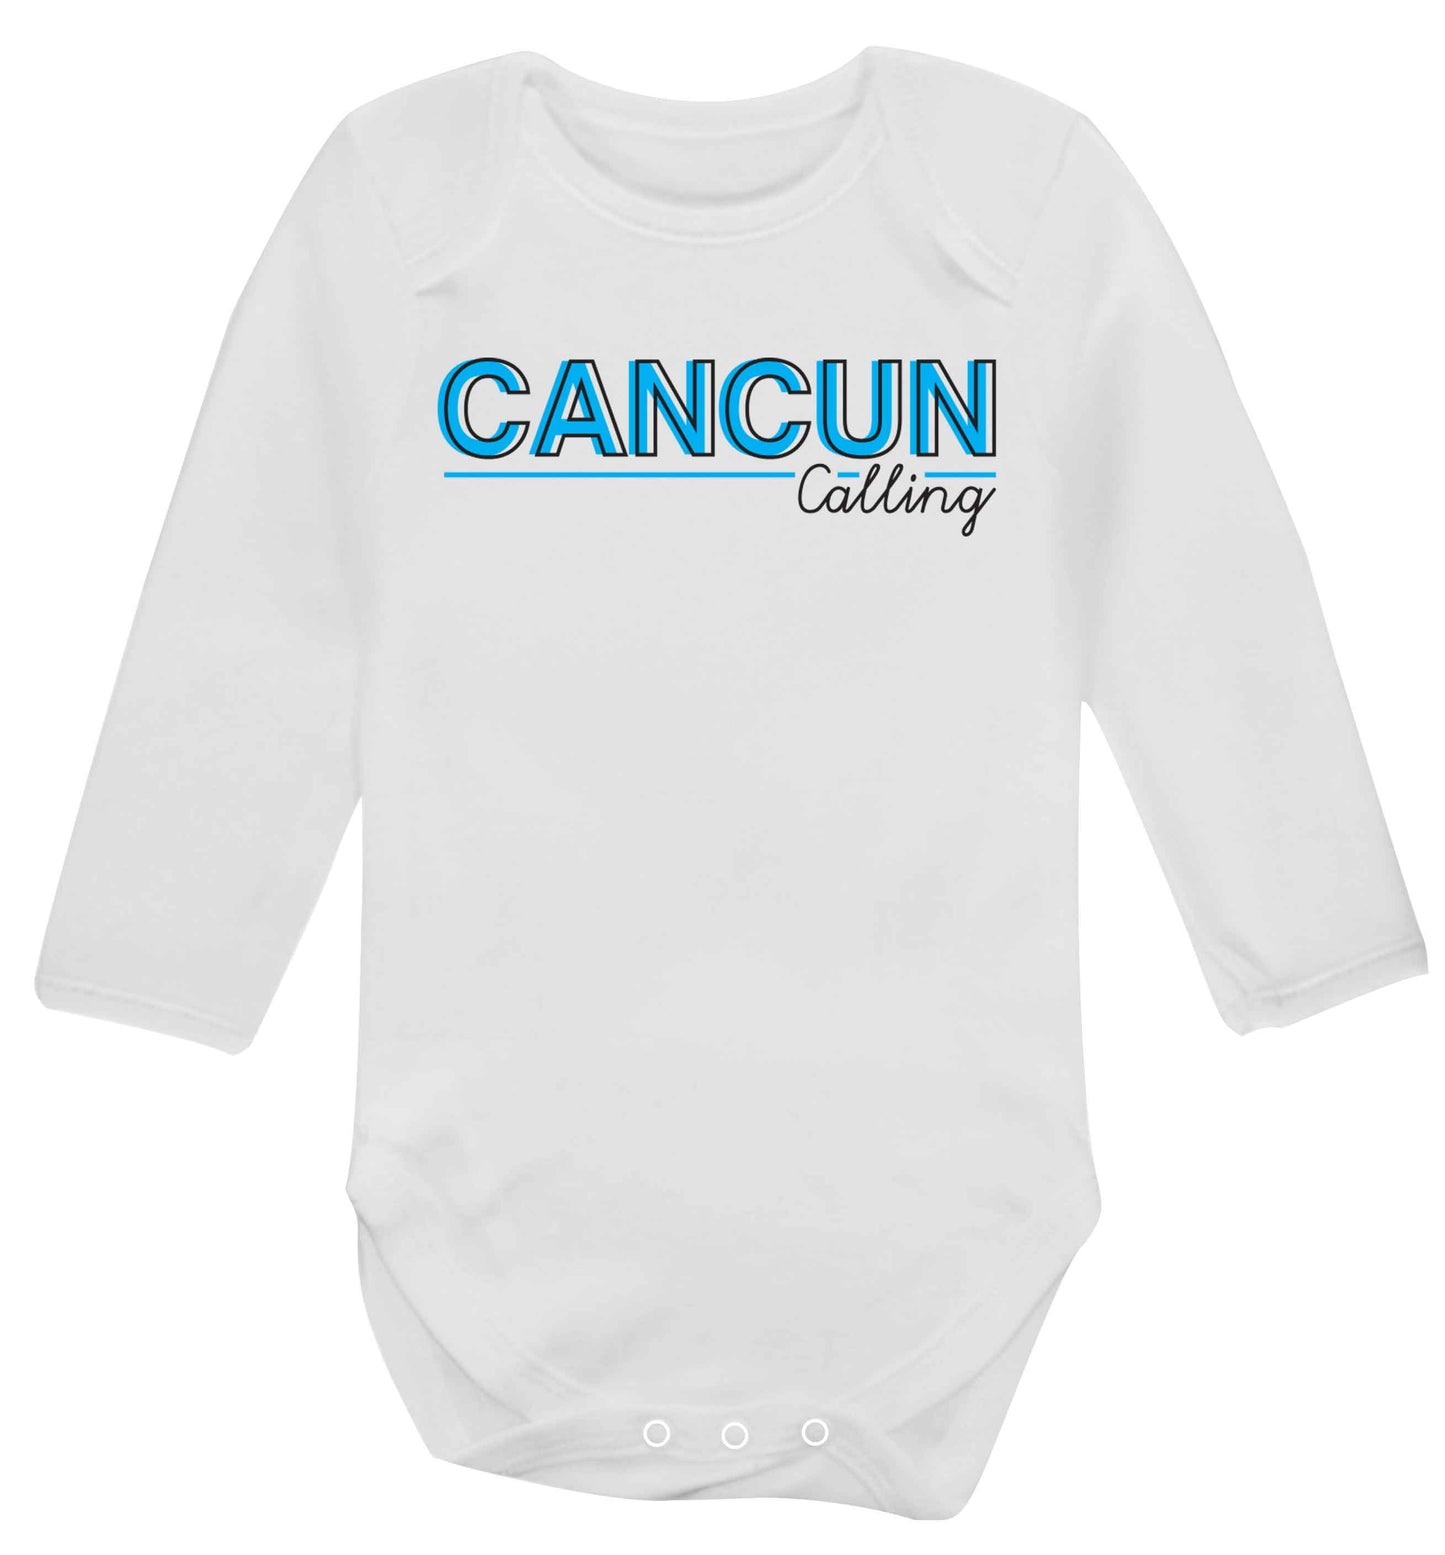 Cancun calling Baby Vest long sleeved white 6-12 months